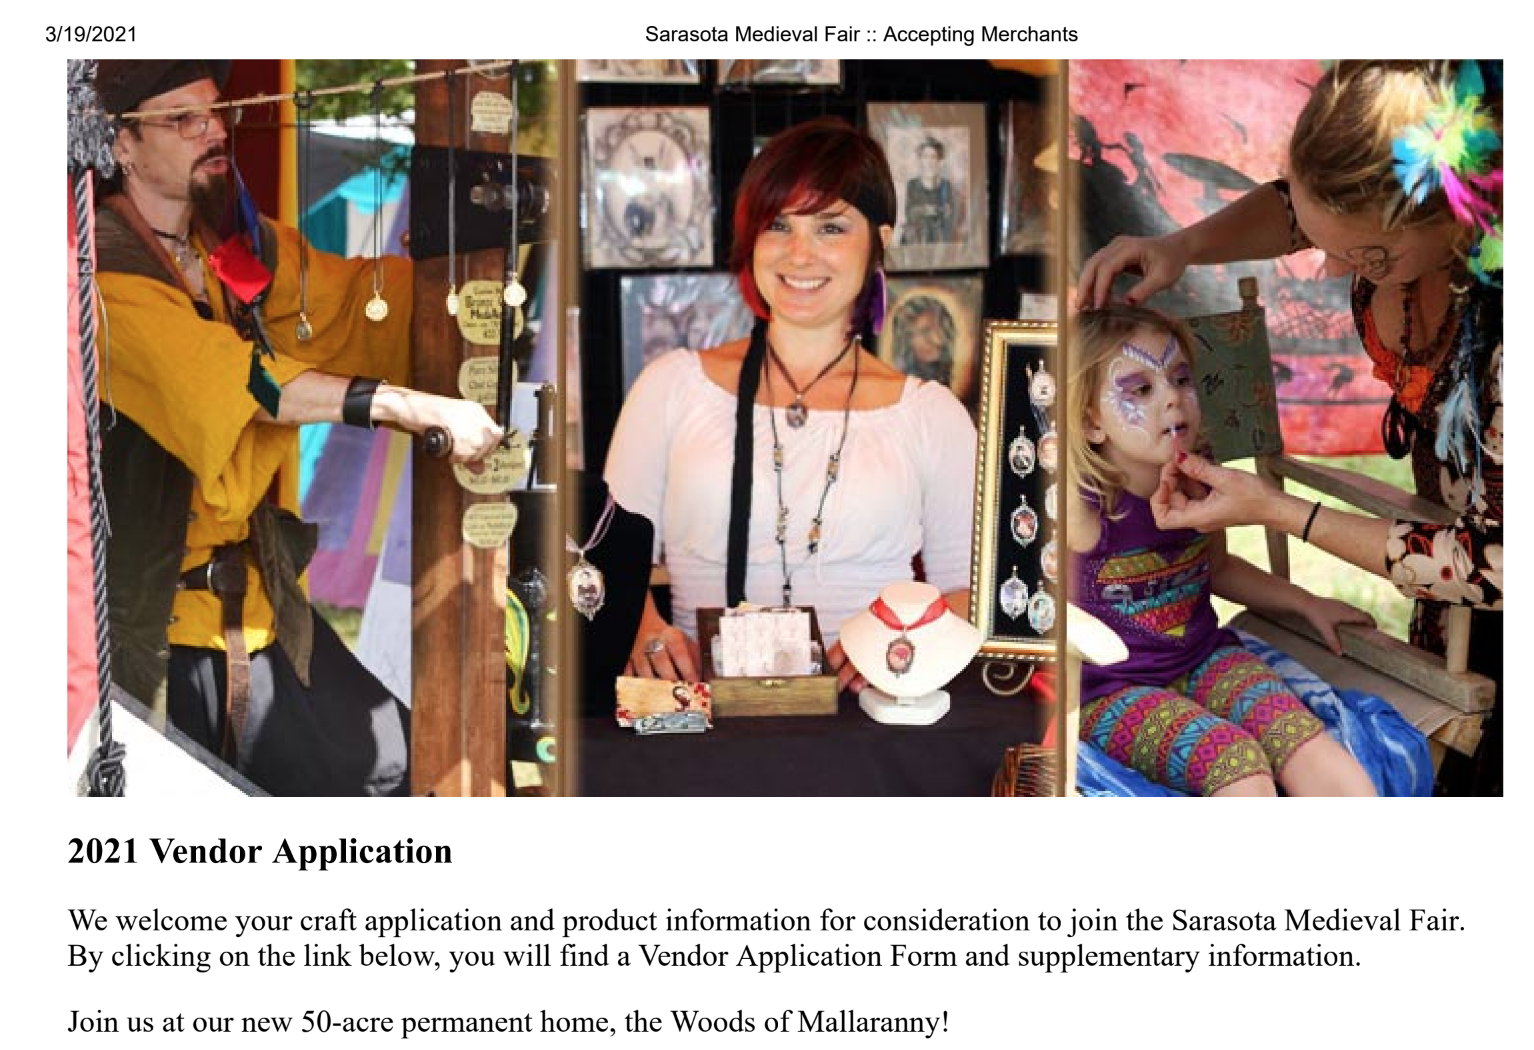 A screenshot from the “Accepting Merchants” section of the fair's website advertised its 